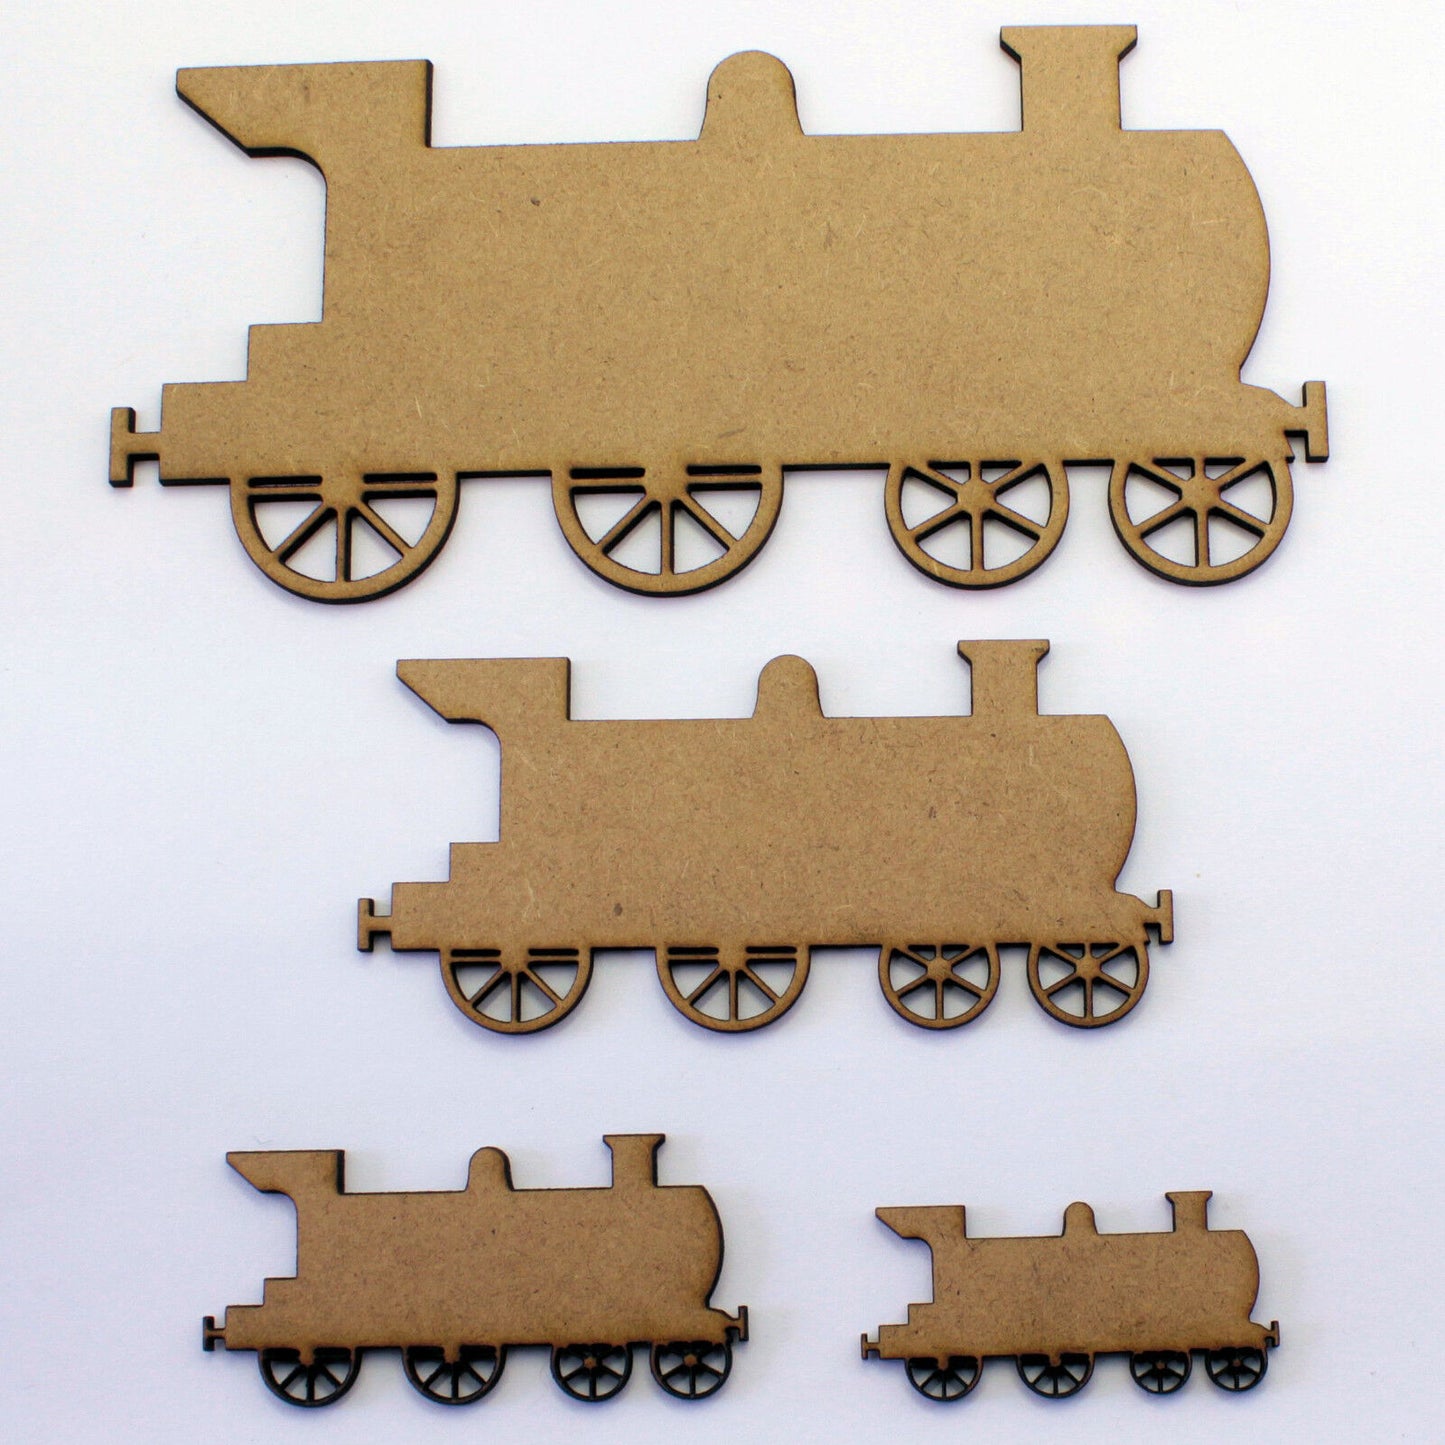 Train and Carriage Craft Shapes, Embellishments Decorations. 2mm MDF Wood